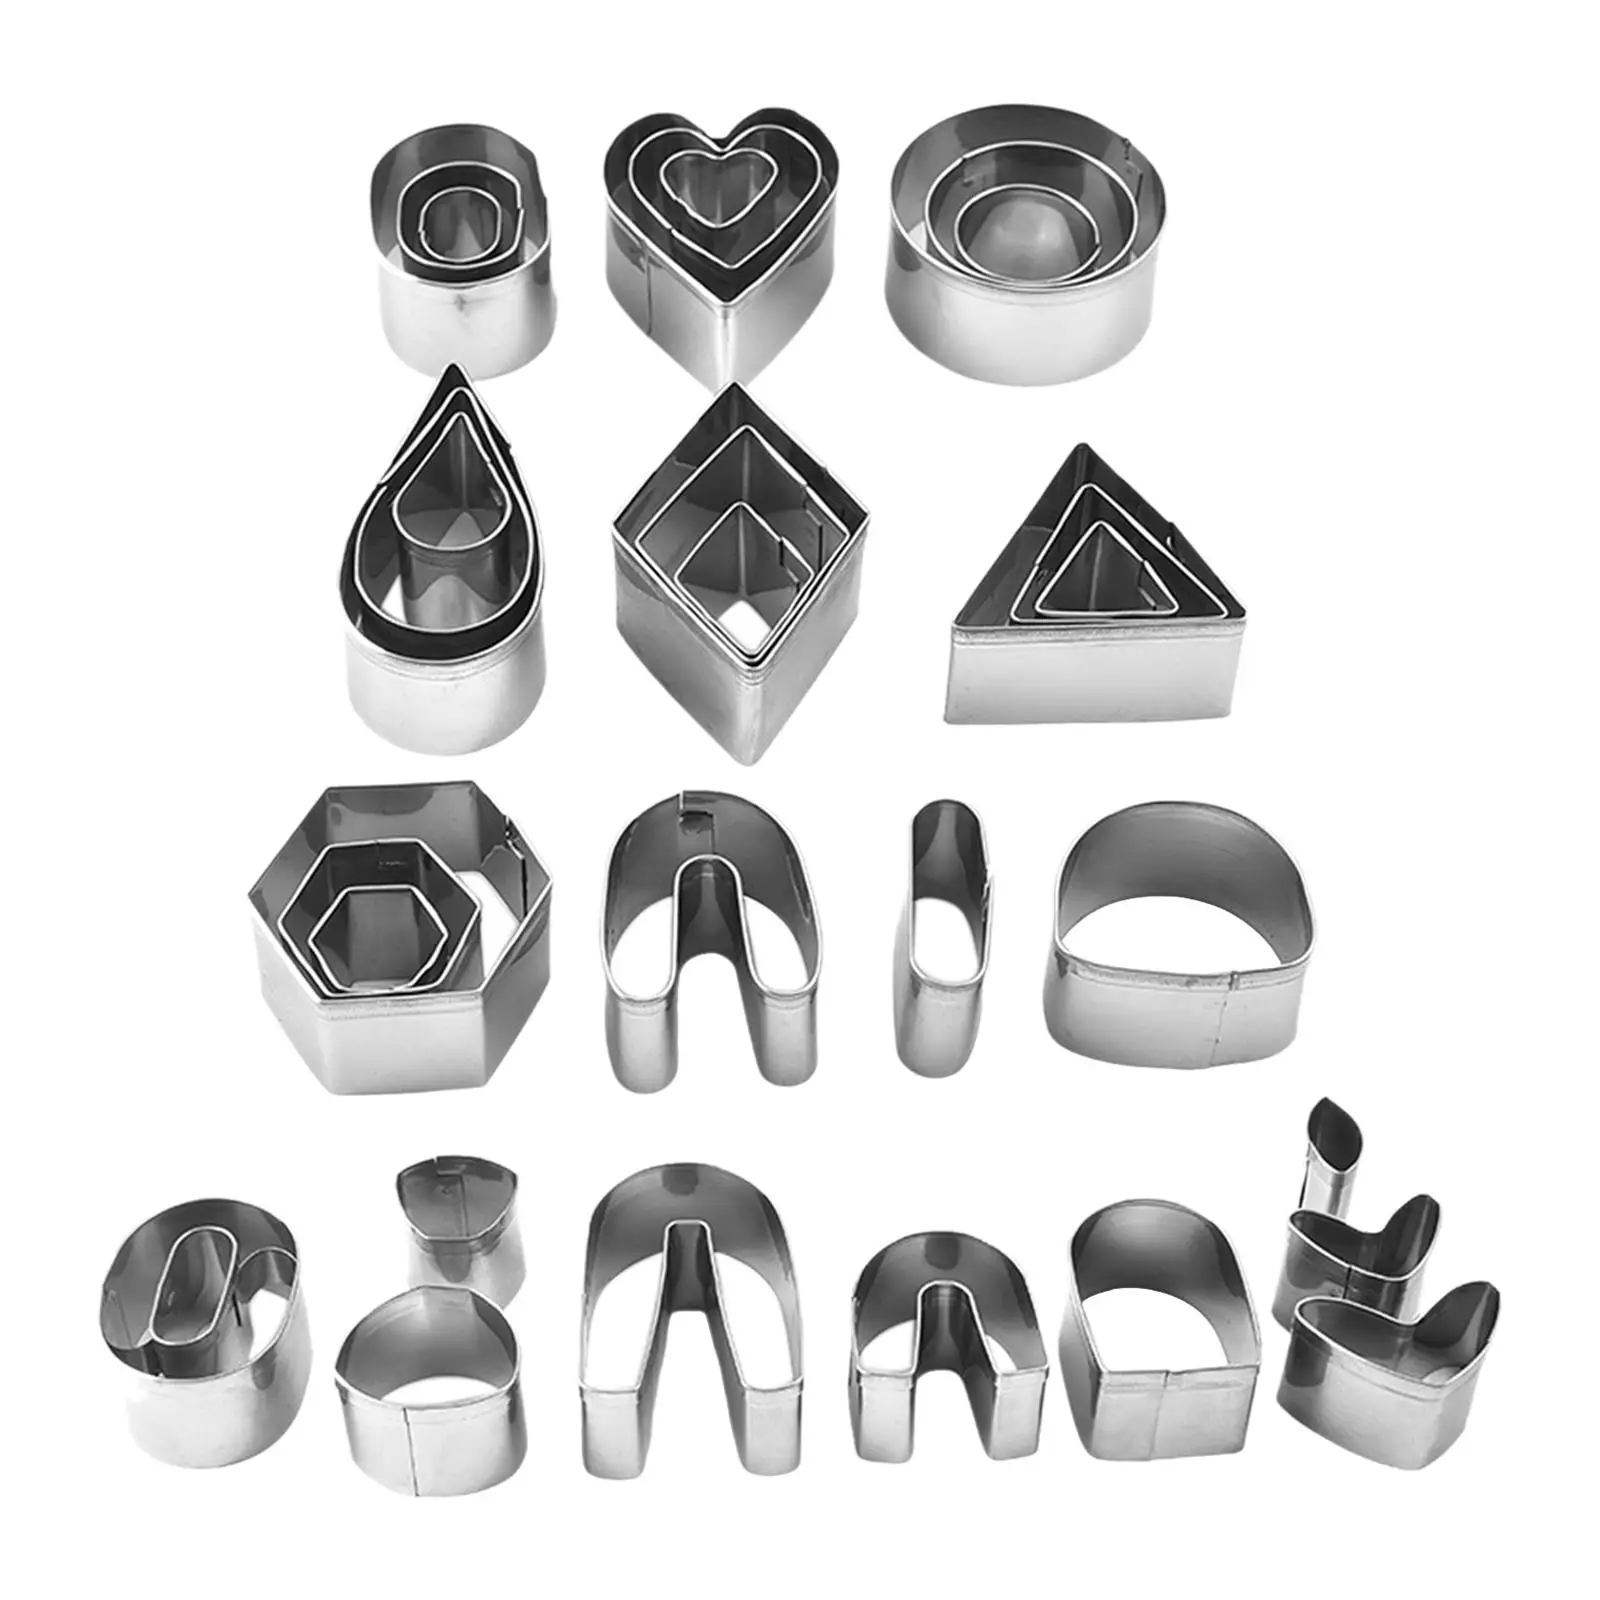 33 Pieces Polymer Clay Handmade DIY Metal Starter Pack Mini Shapes Cutter for Kitchen Homemade Baking Vegetable Earring